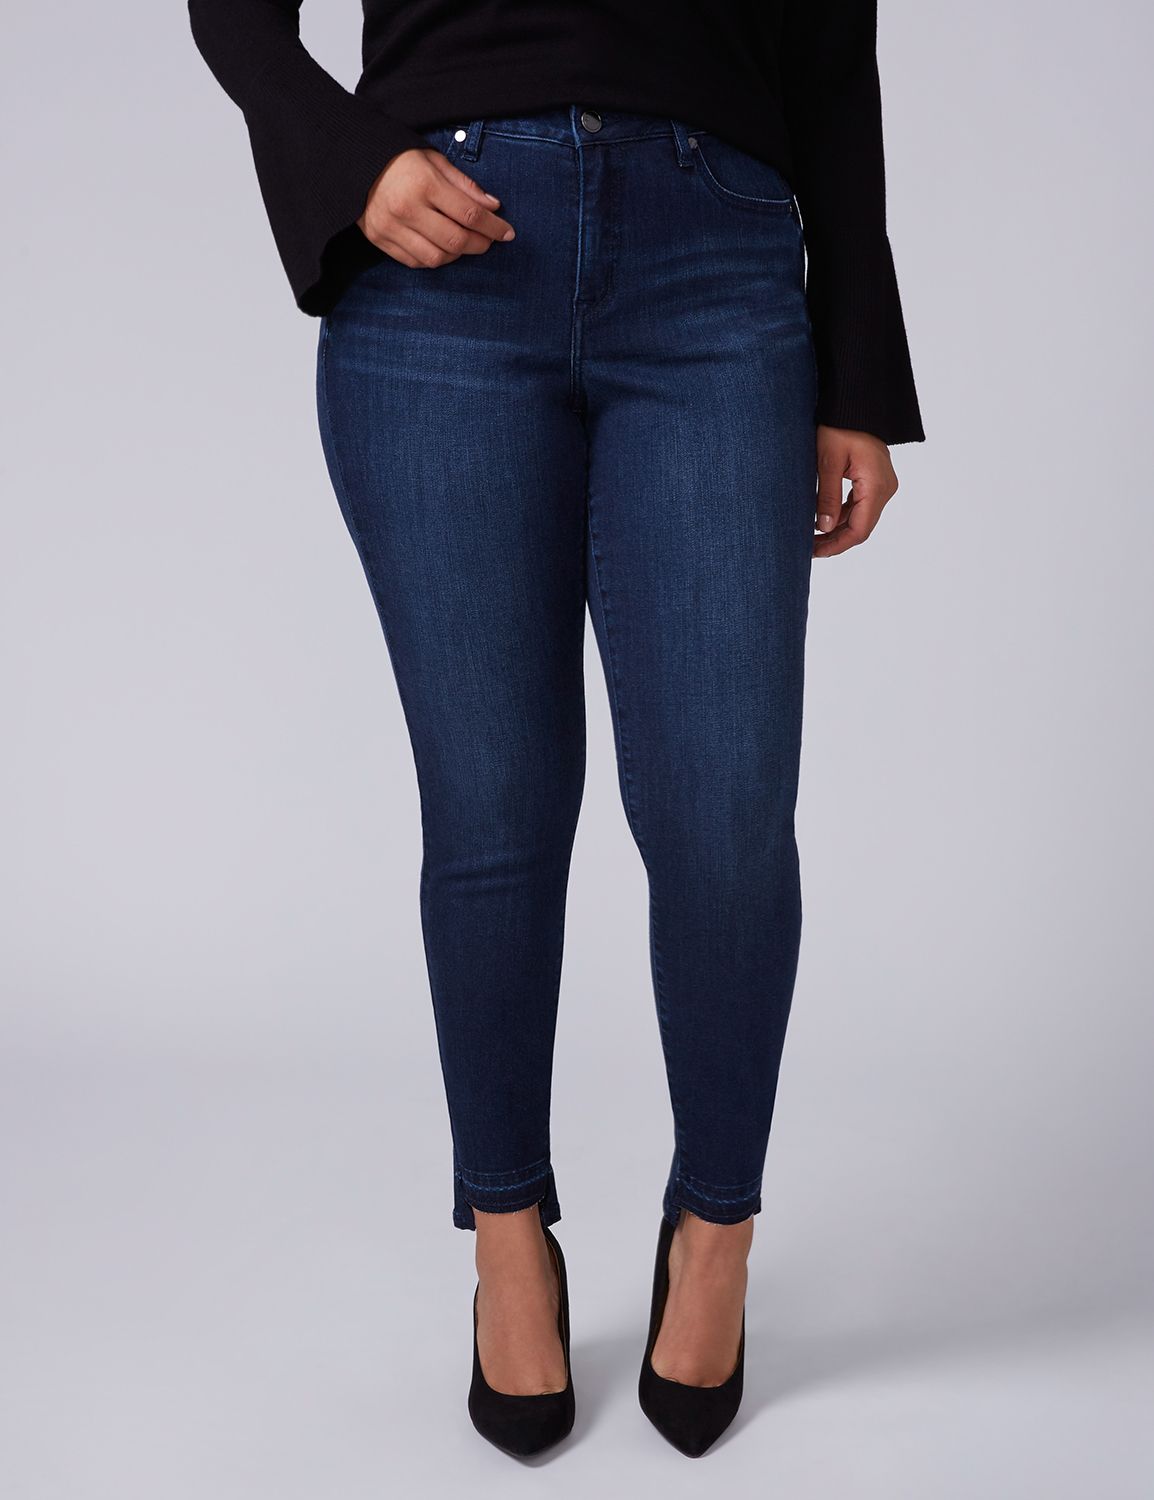 Plus Size Jeans | Styles Including Skinny, Bootcut and Boyfriend Jeans ...